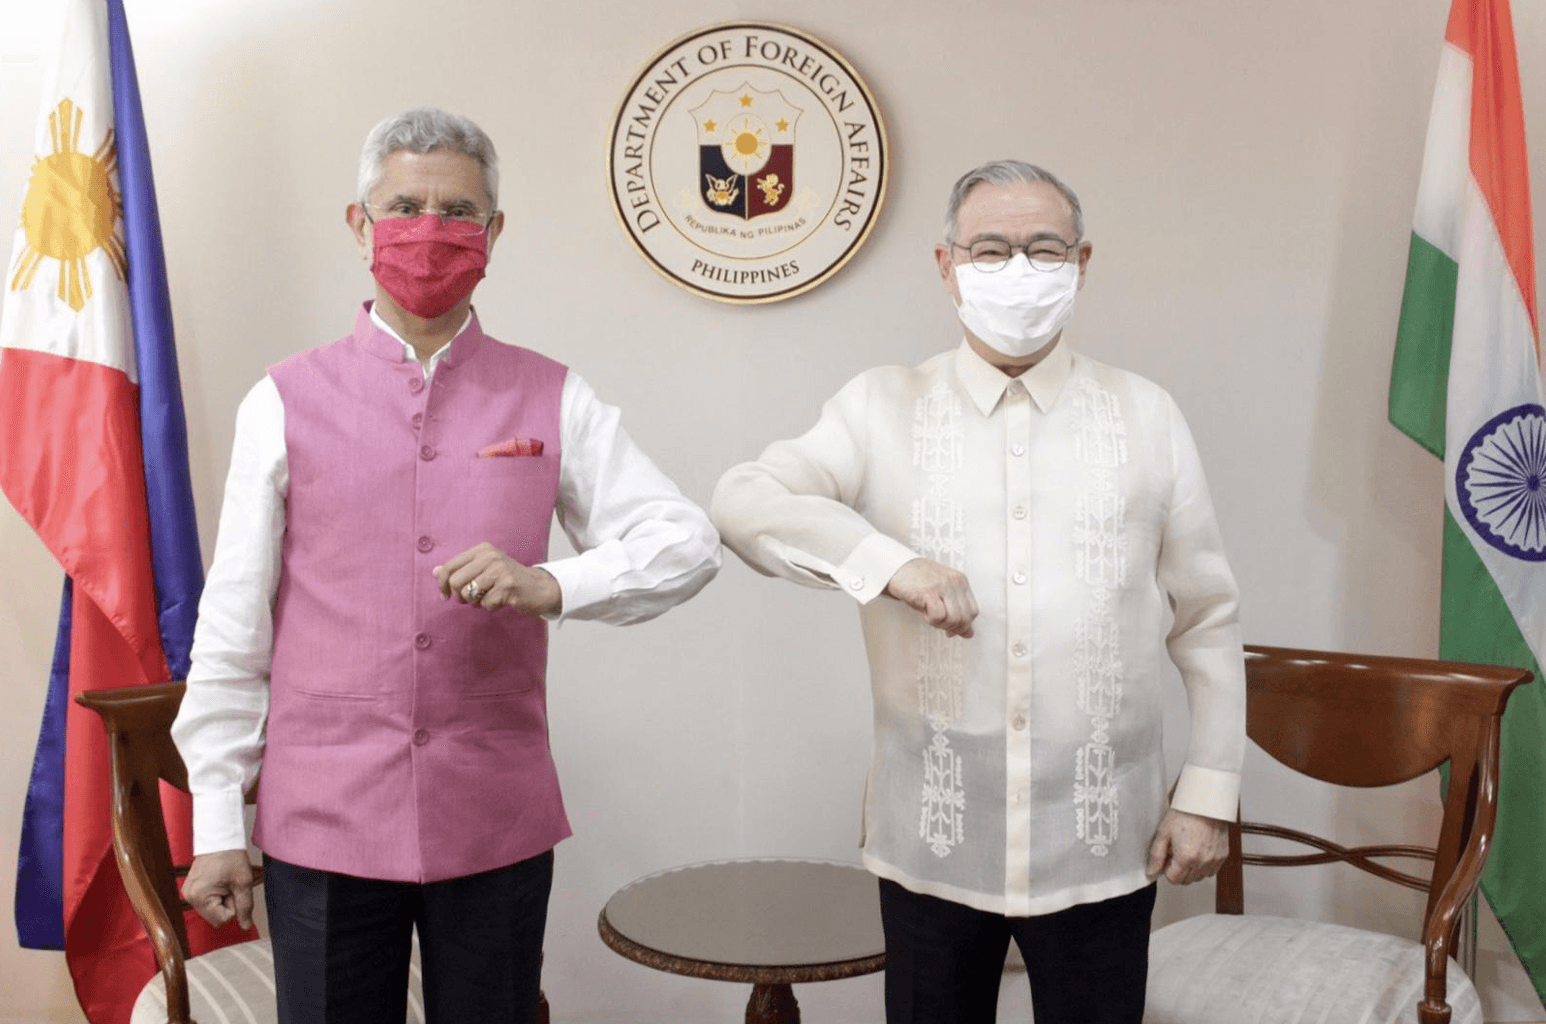 Seeking ‘new phase’ in ties, Indian foreign minister makes first visit to PH